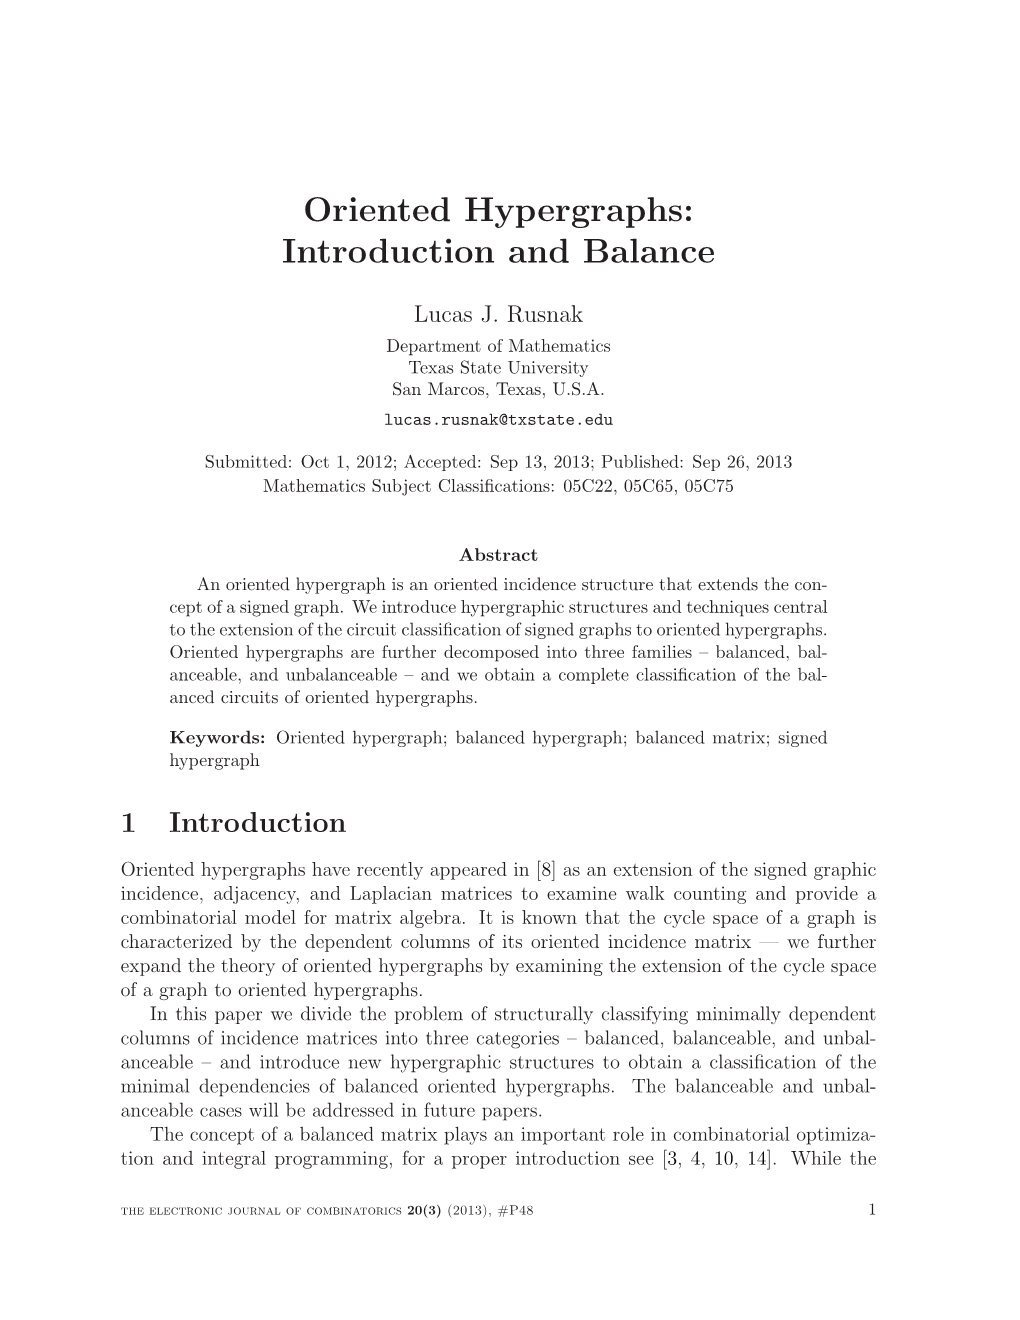 Oriented Hypergraphs: Introduction and Balance